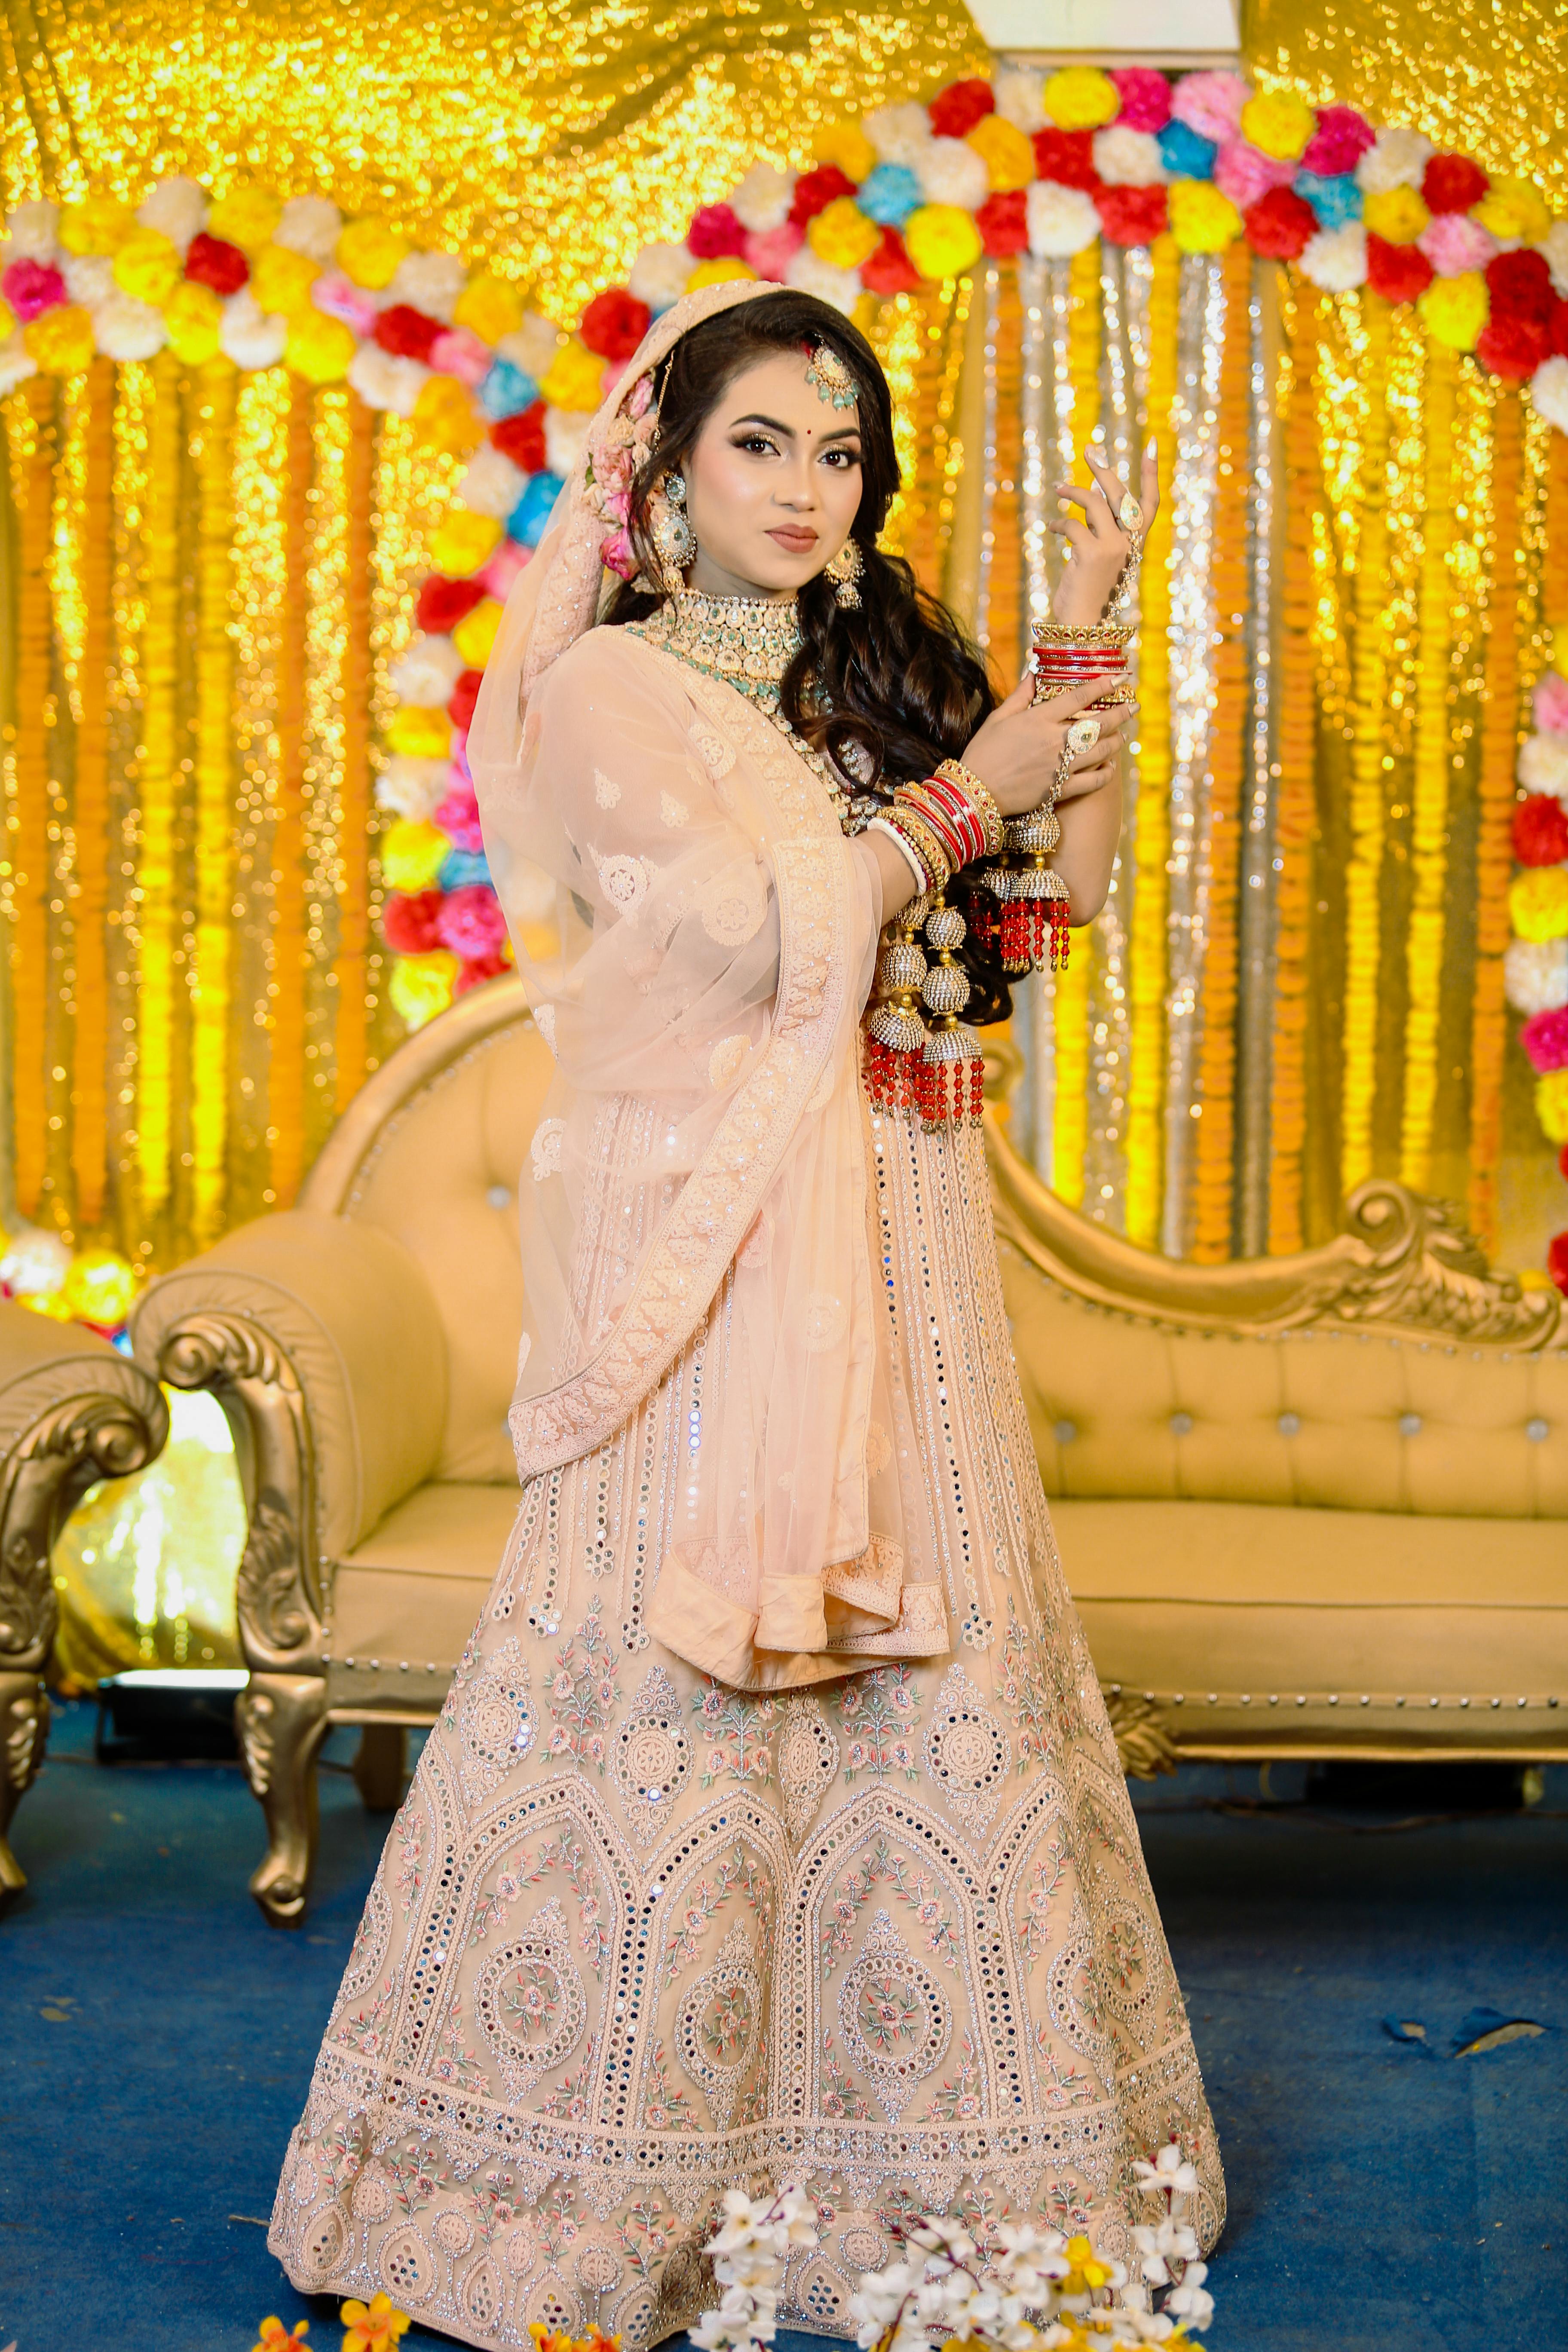 Attending a Traditional Indian Wedding? Here's Exactly What to Wear as a  Guest | Indian wedding guest dress, Traditional indian wedding, Wedding  guest outfit fall